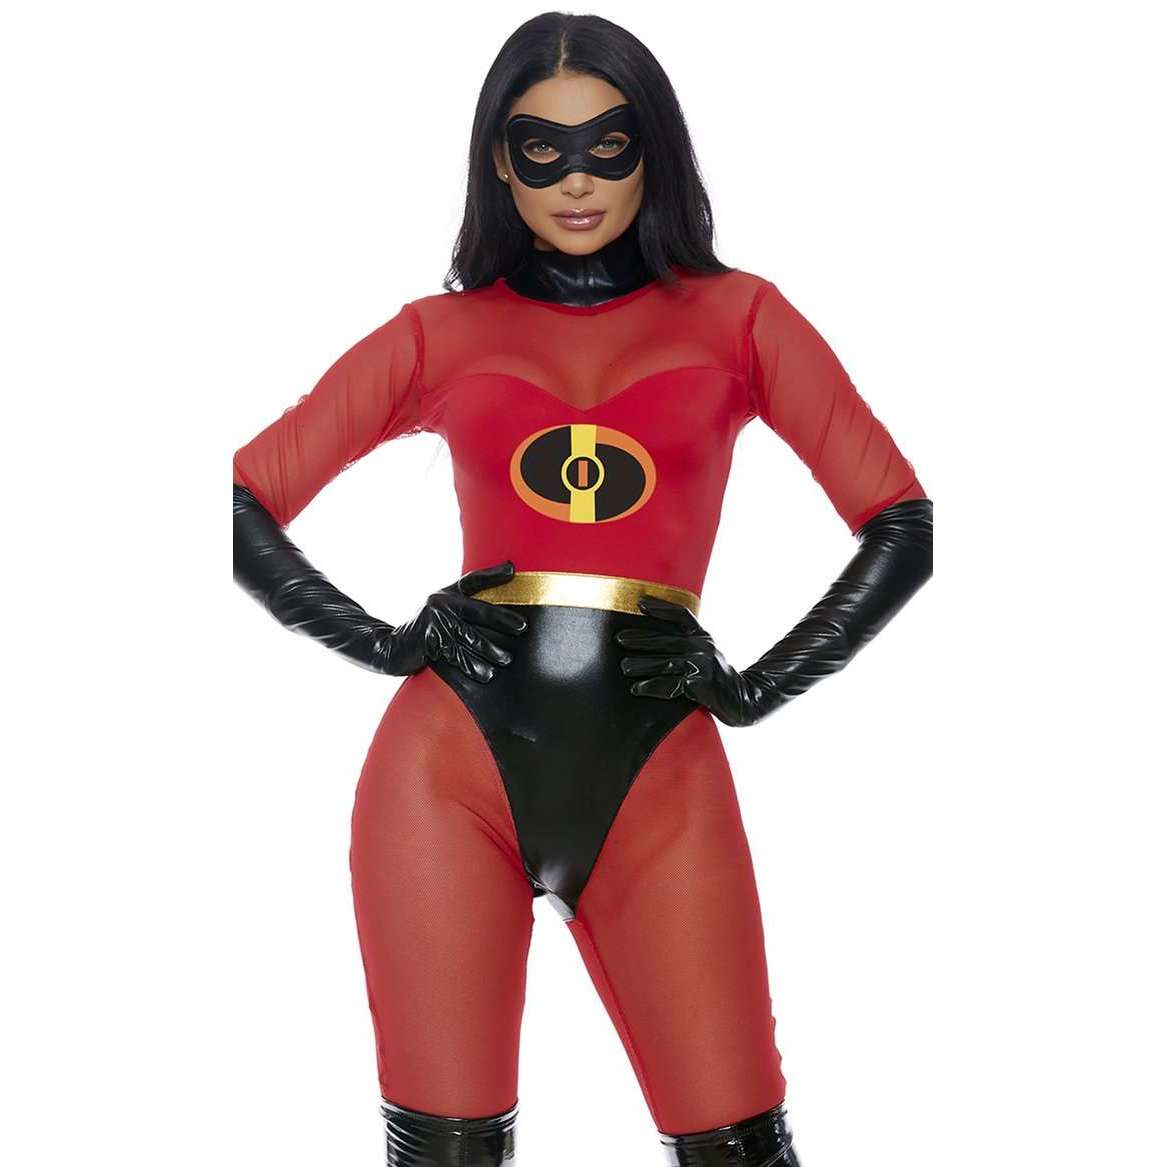 Iconic Super Suit Women's Movie Character Adult Costume